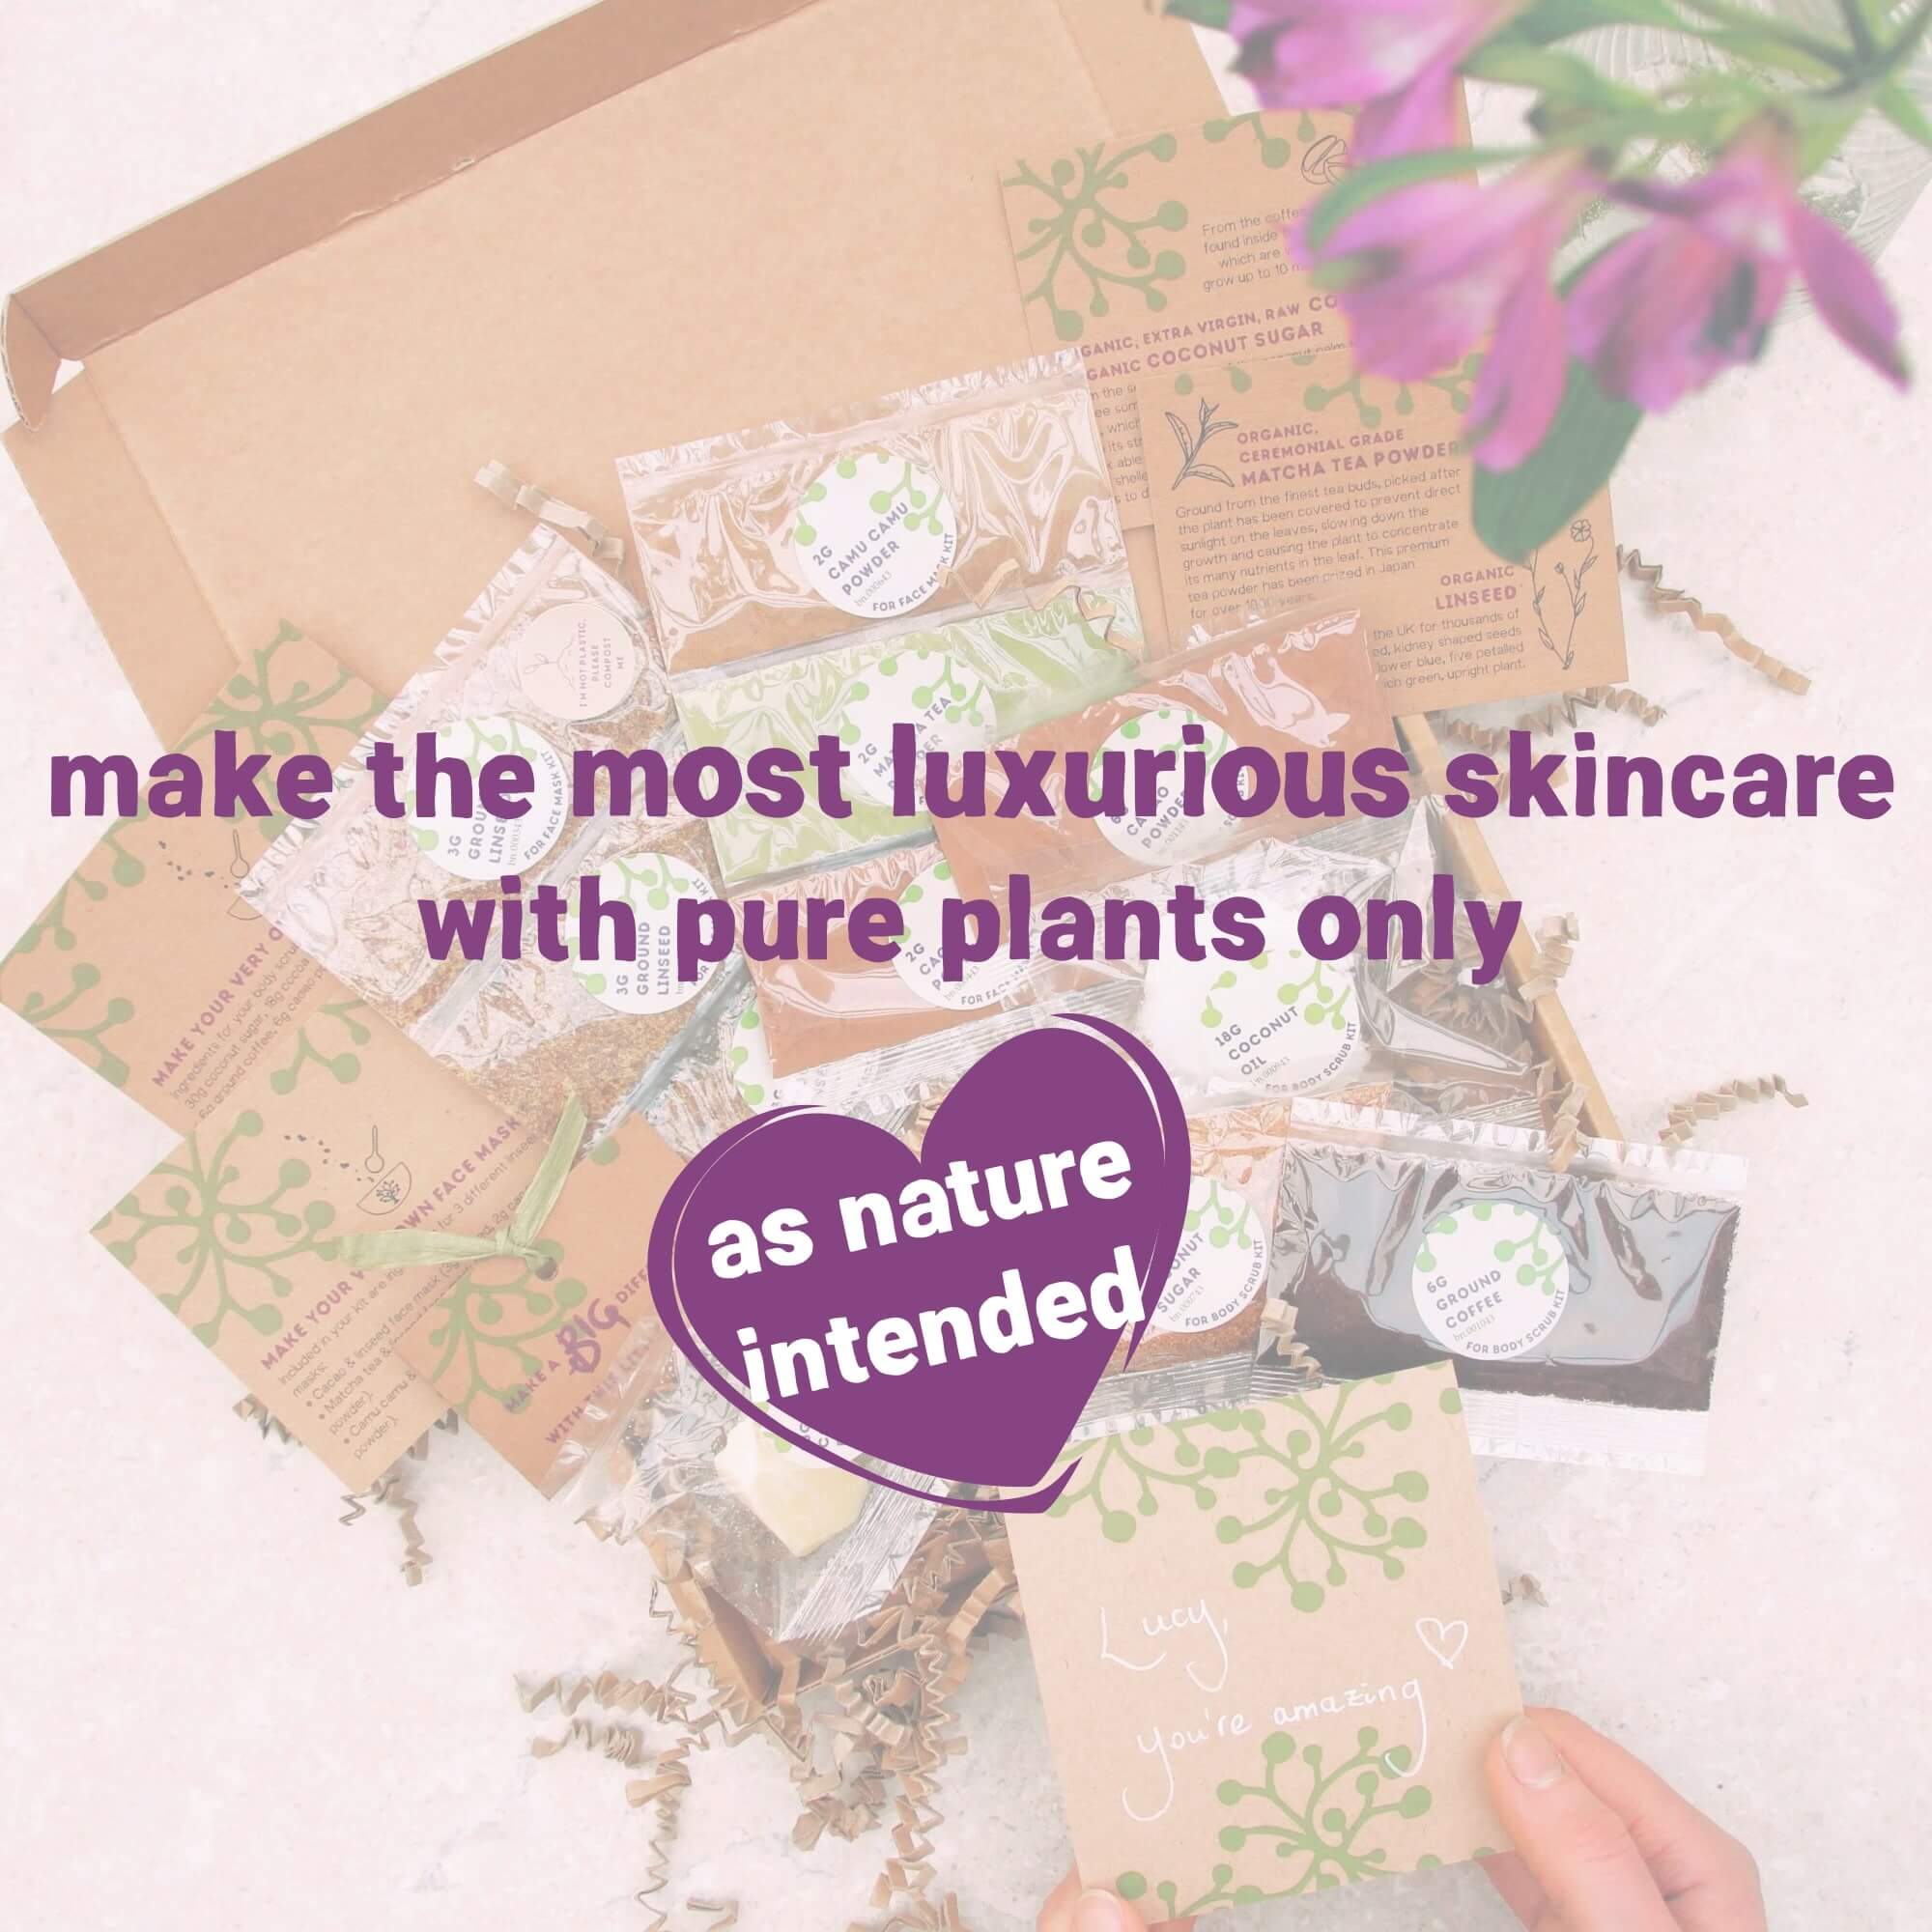 Get Well Soon Organic Vegan Make Your Own Skincare Pamper Letterbox Gift